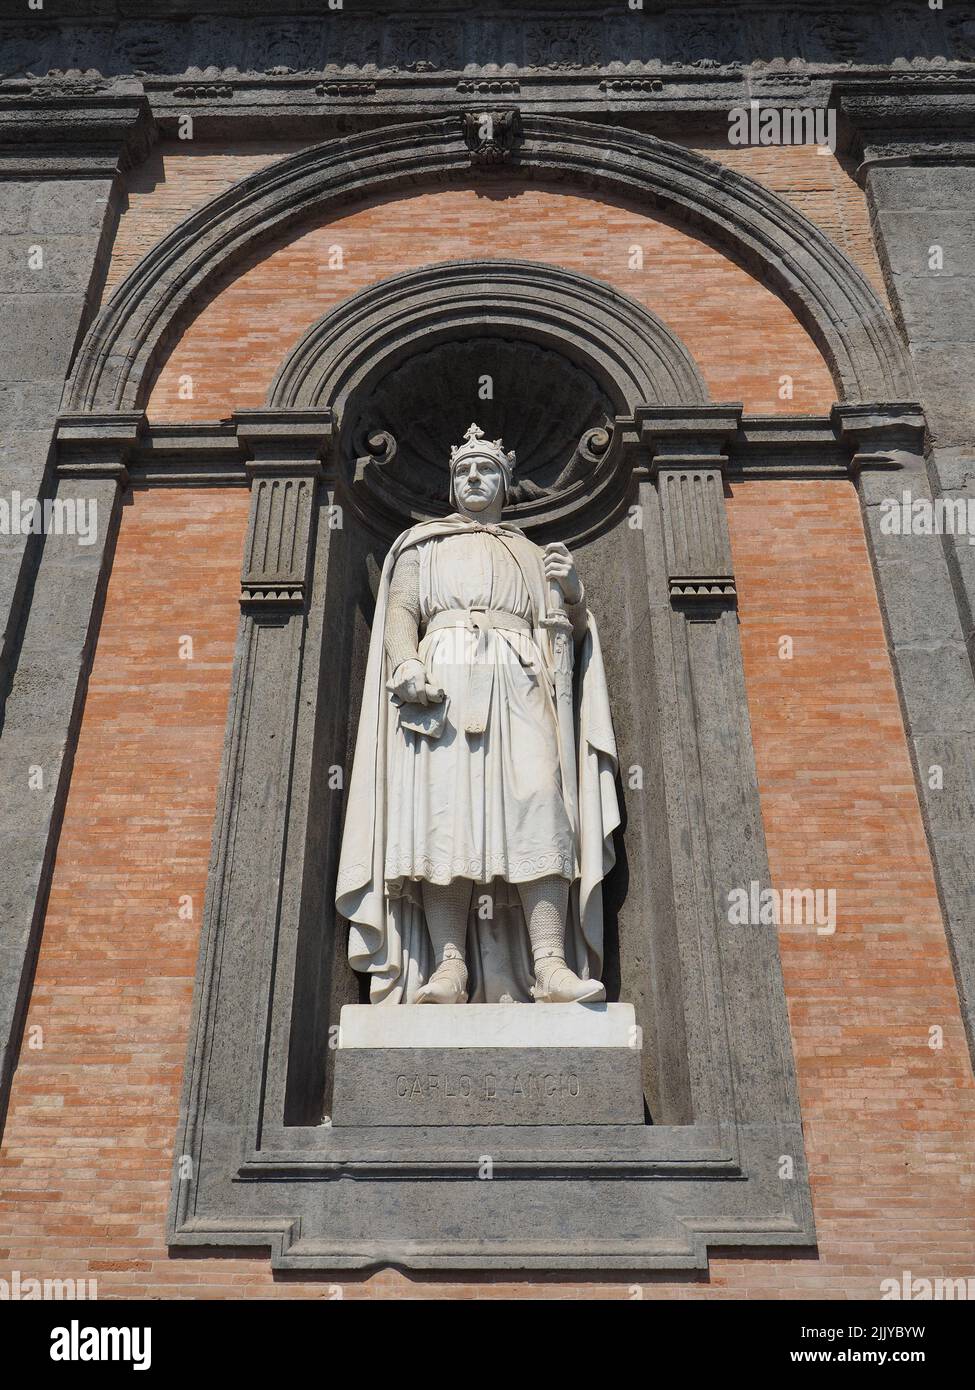 Statue of King Carlo d'Angio on the facade of the Palazzo Reale in Naples, Campania, Italy. Stock Photo